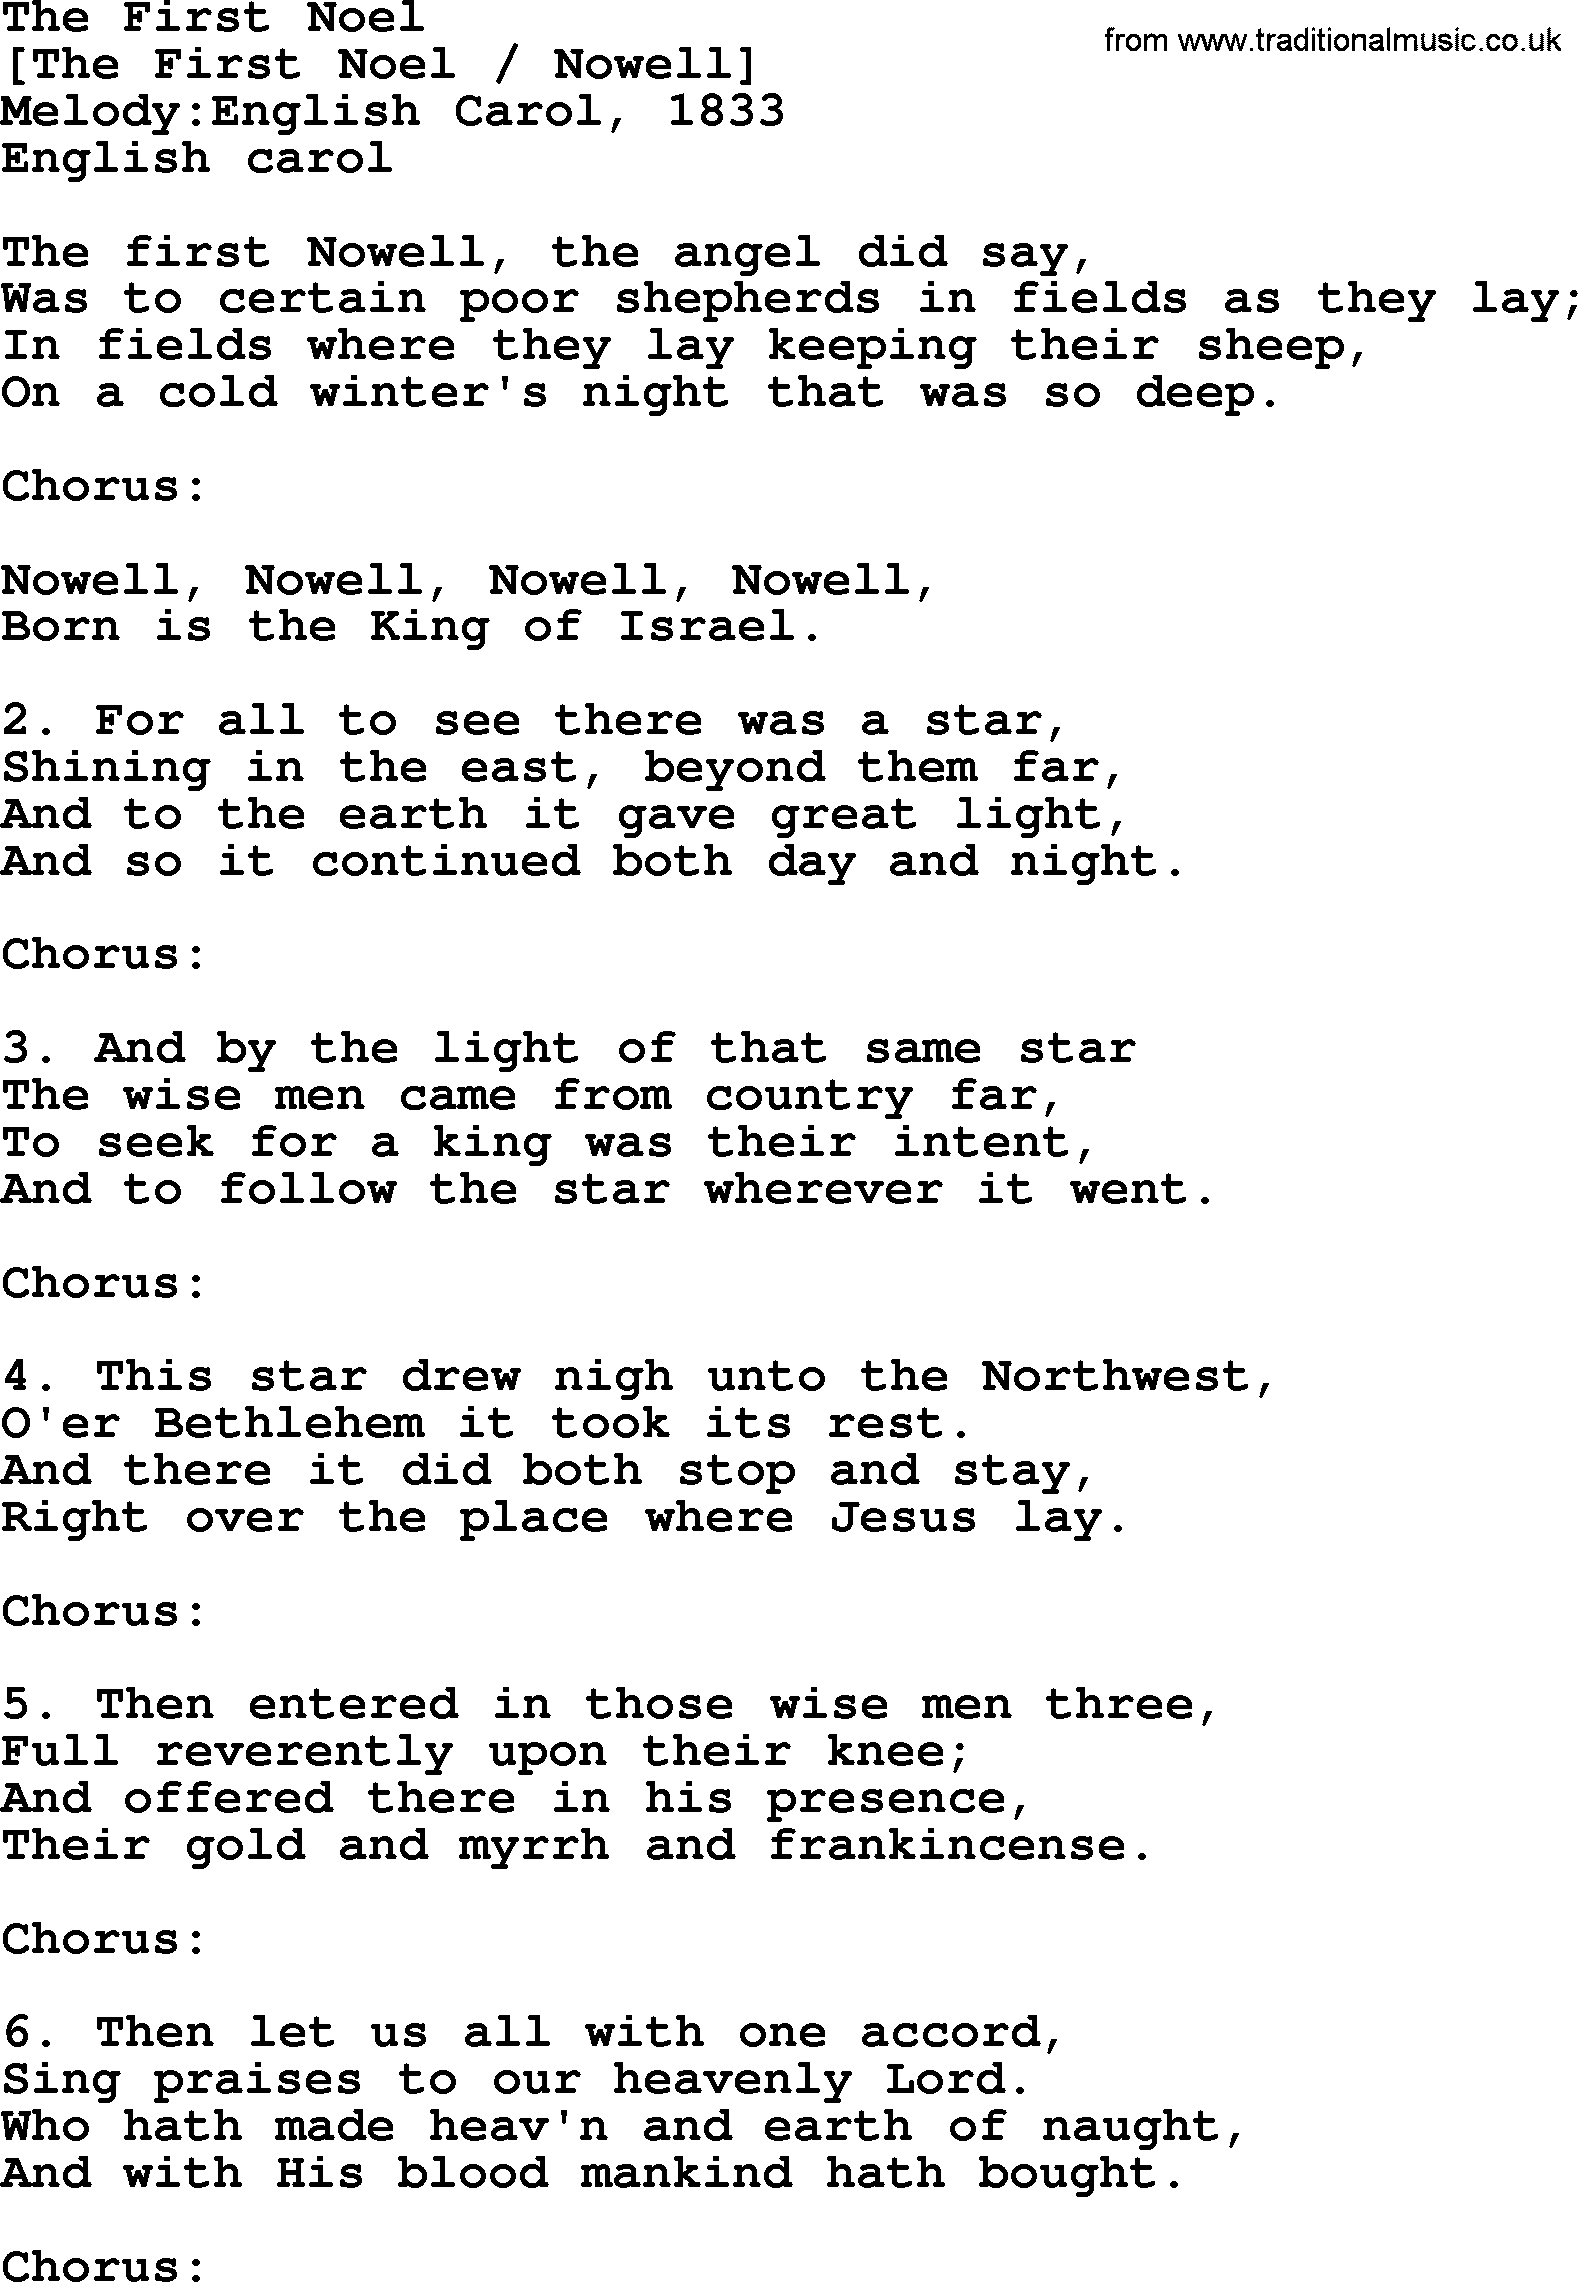 Old English Song: The First Noel lyrics